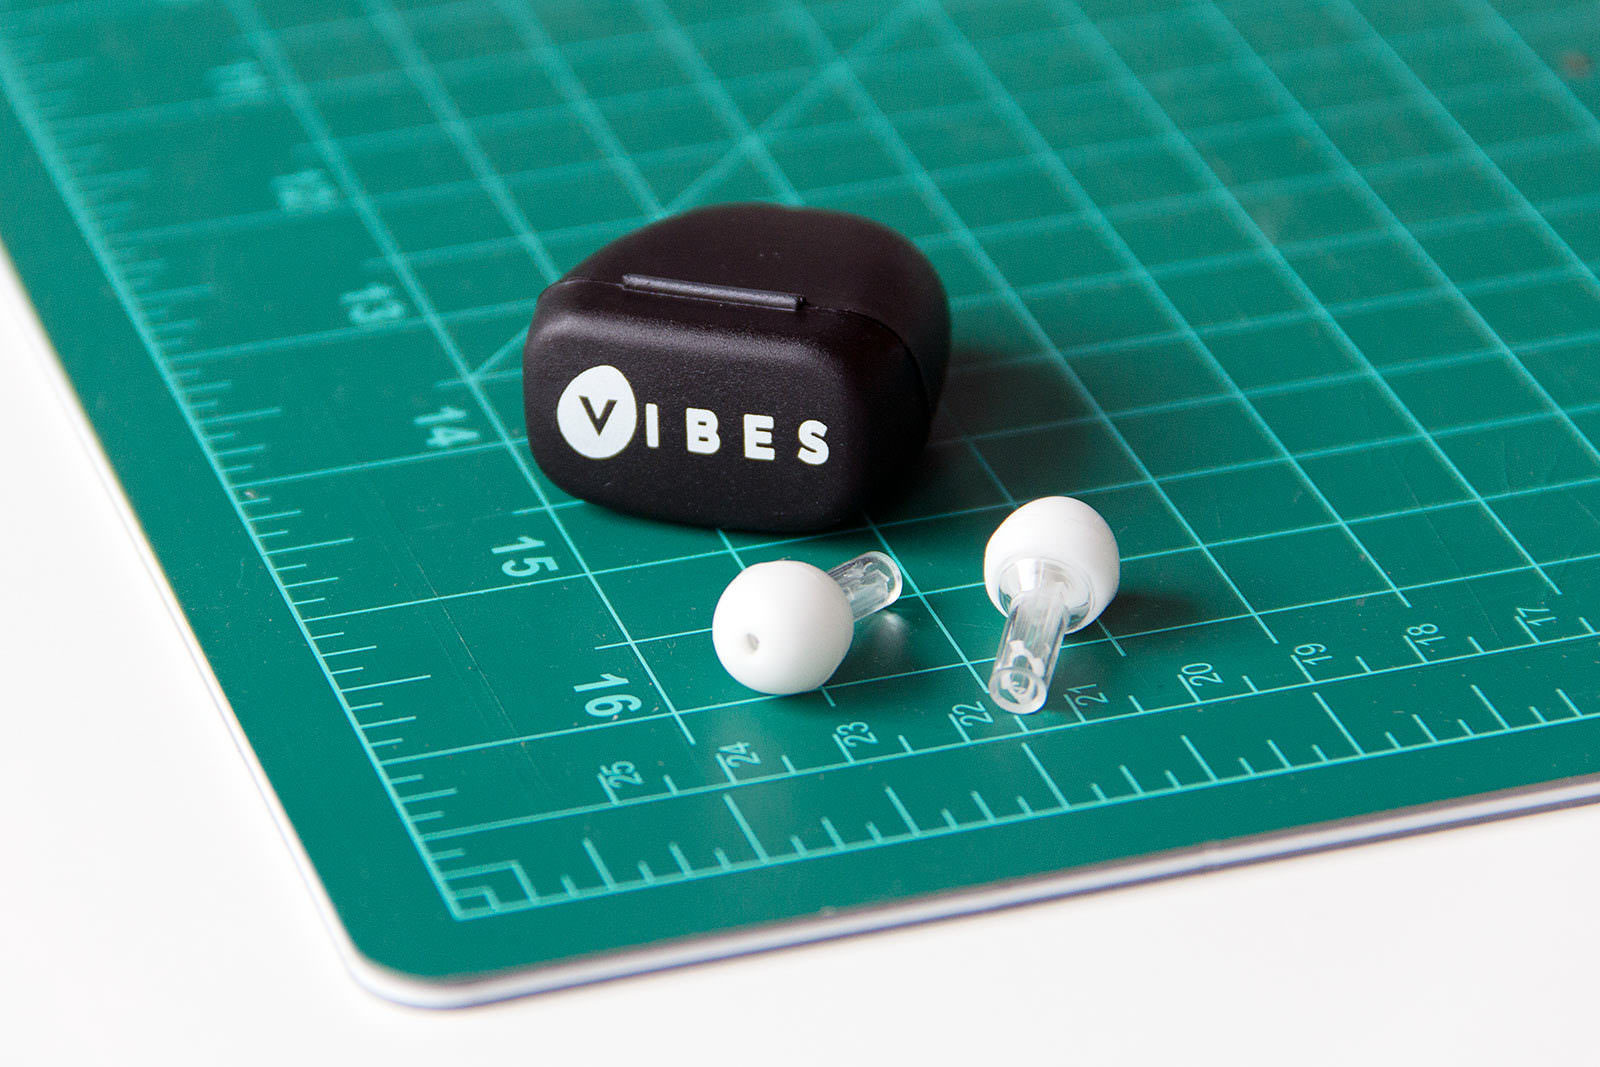 Normally $24, these earplugs are 25 percent off